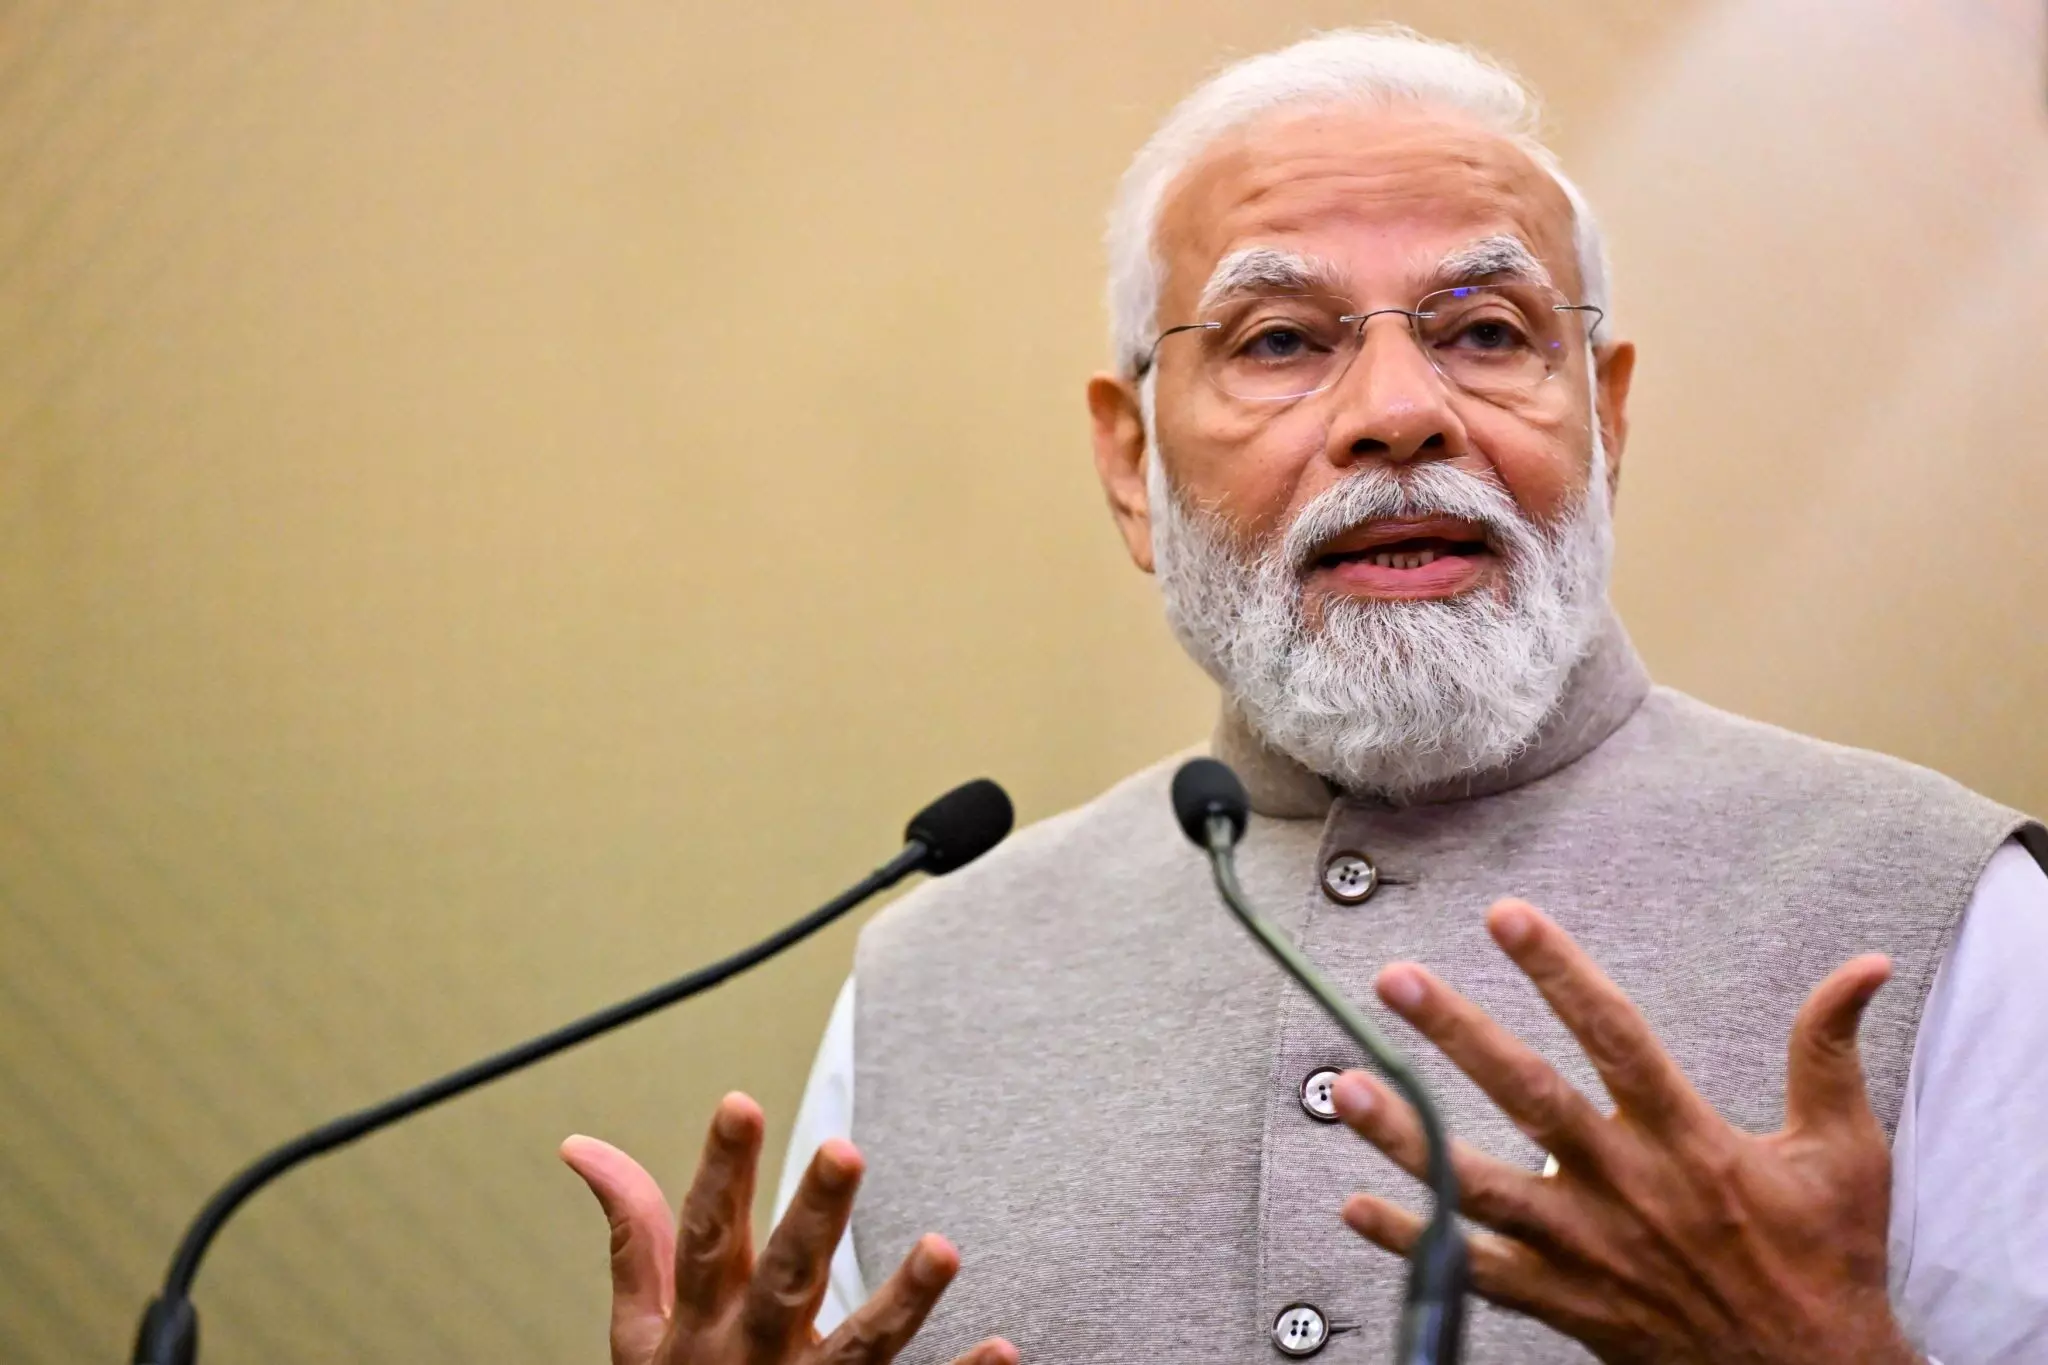 India will now celebrate August 23 as National Space Day PM Modi announced